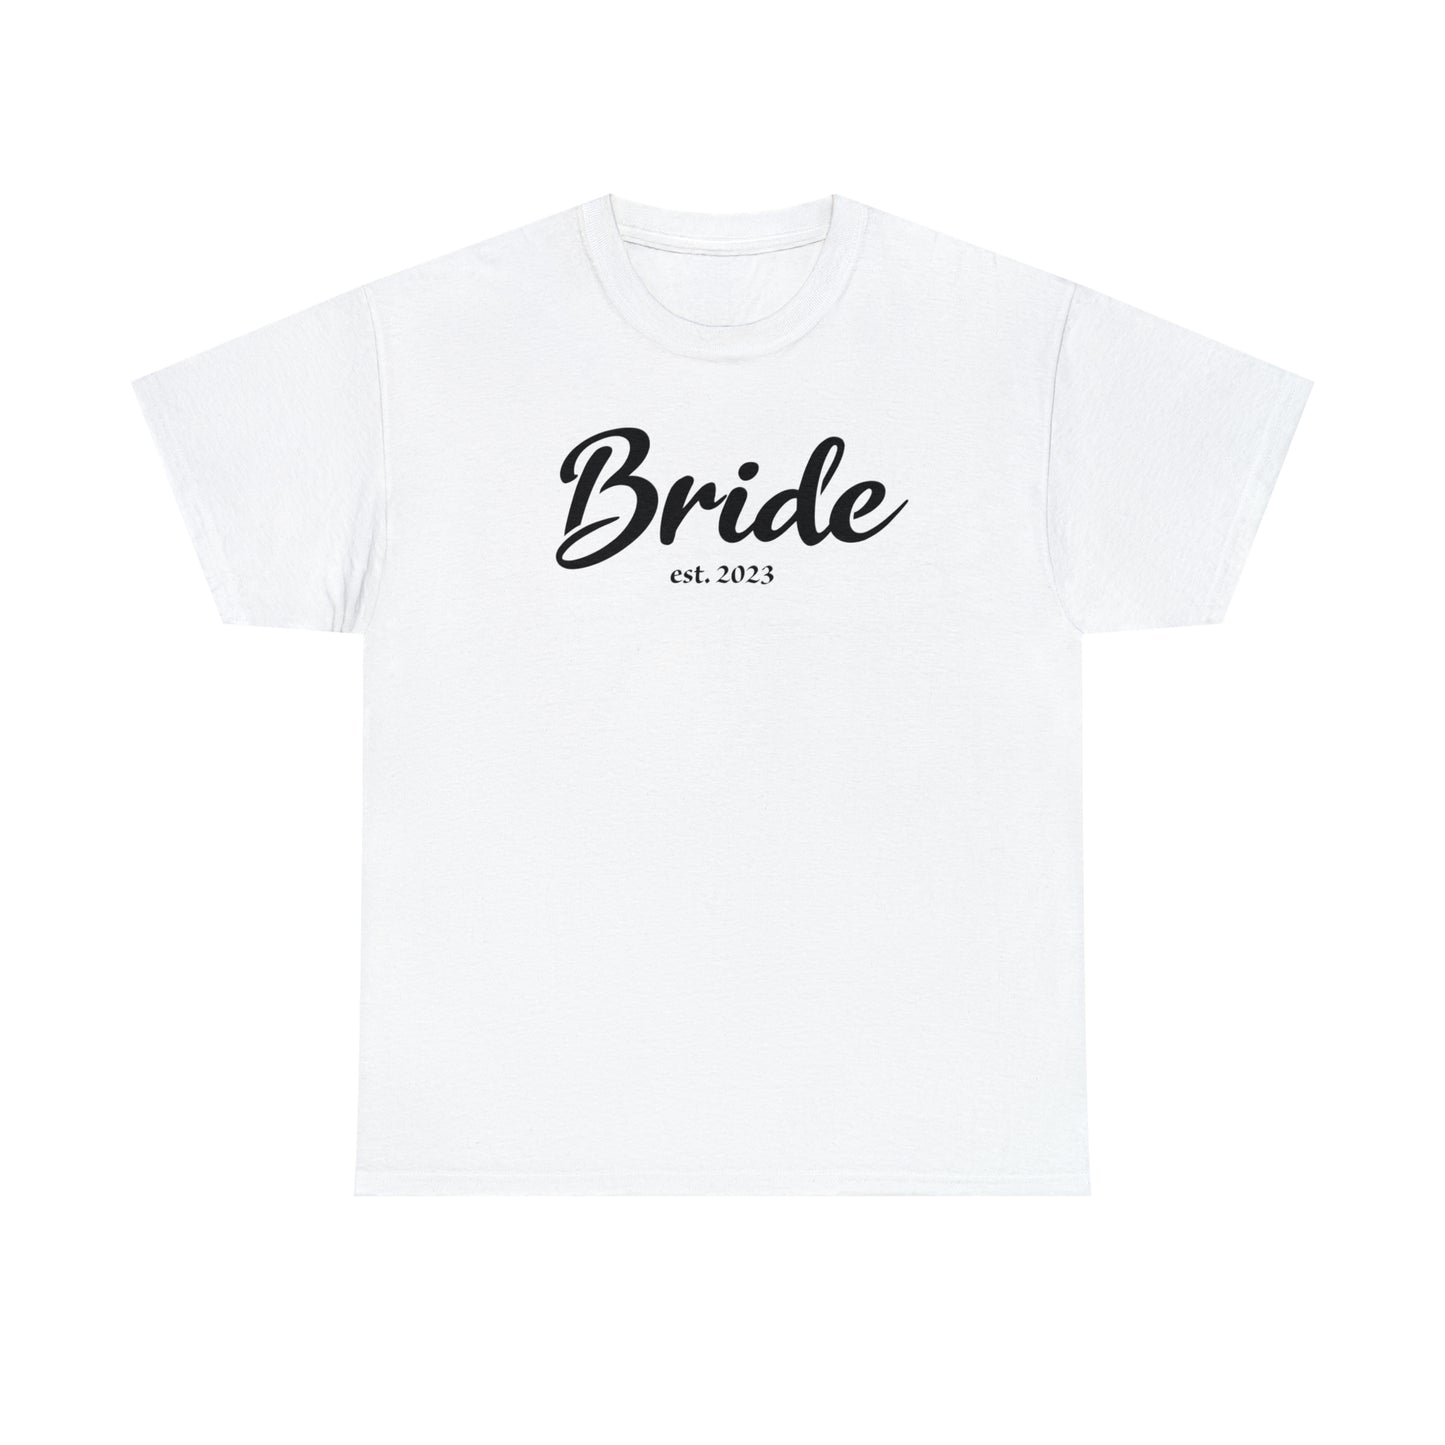 Wife T-Shirt For New Bride TShirt For Honeymoon T Shirt For Matching Shirts For Wedding Couple